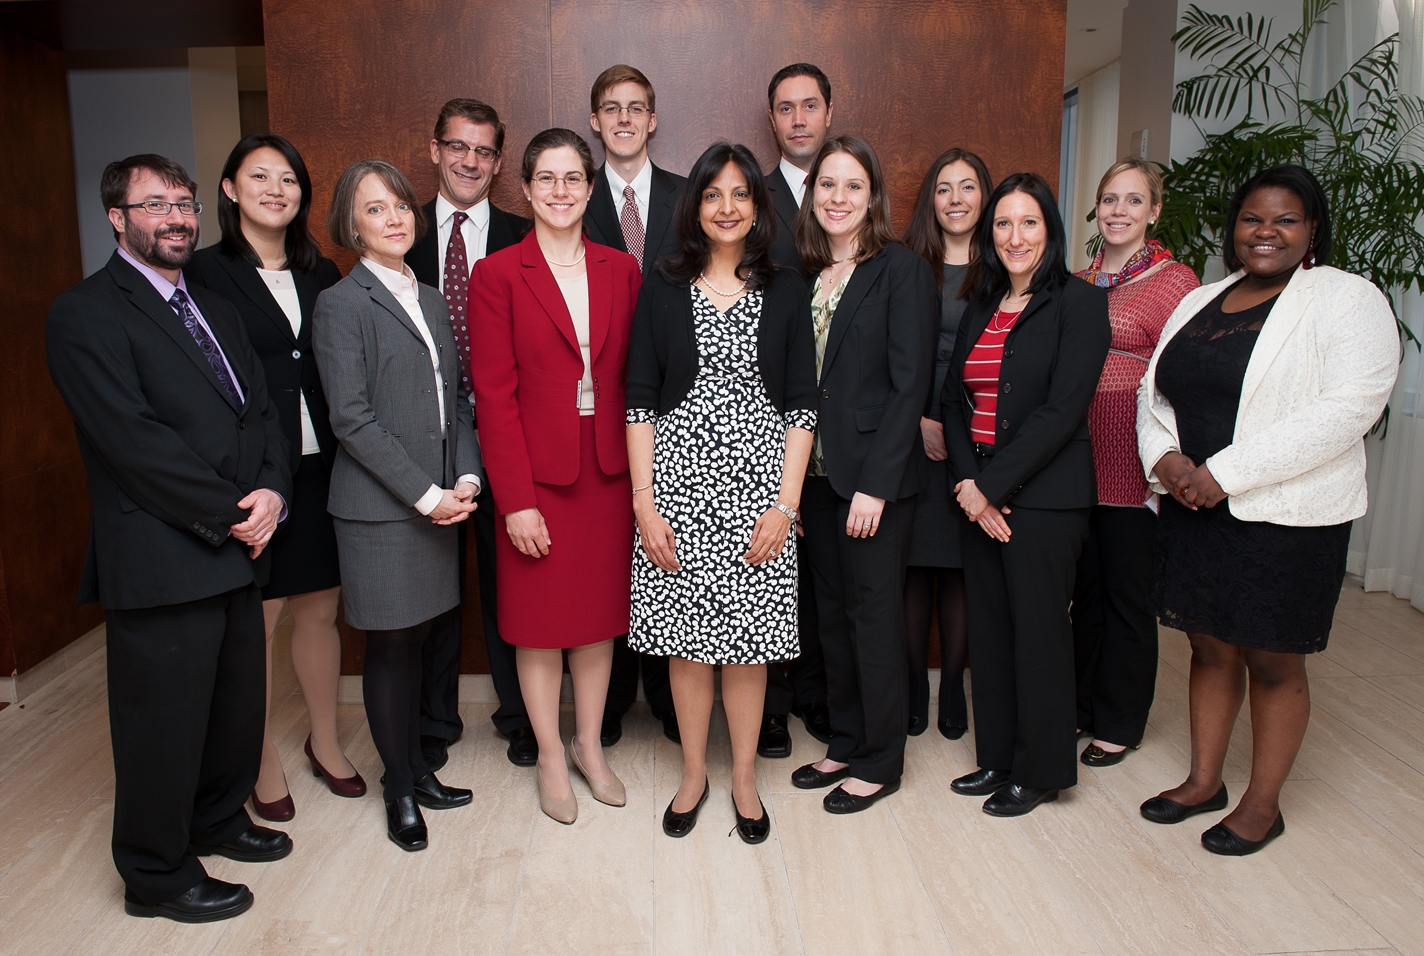 The team at the Center for Healthcare Informatics and Policy at Weill Cornell Medical College. Photo credit: Amelia Panico